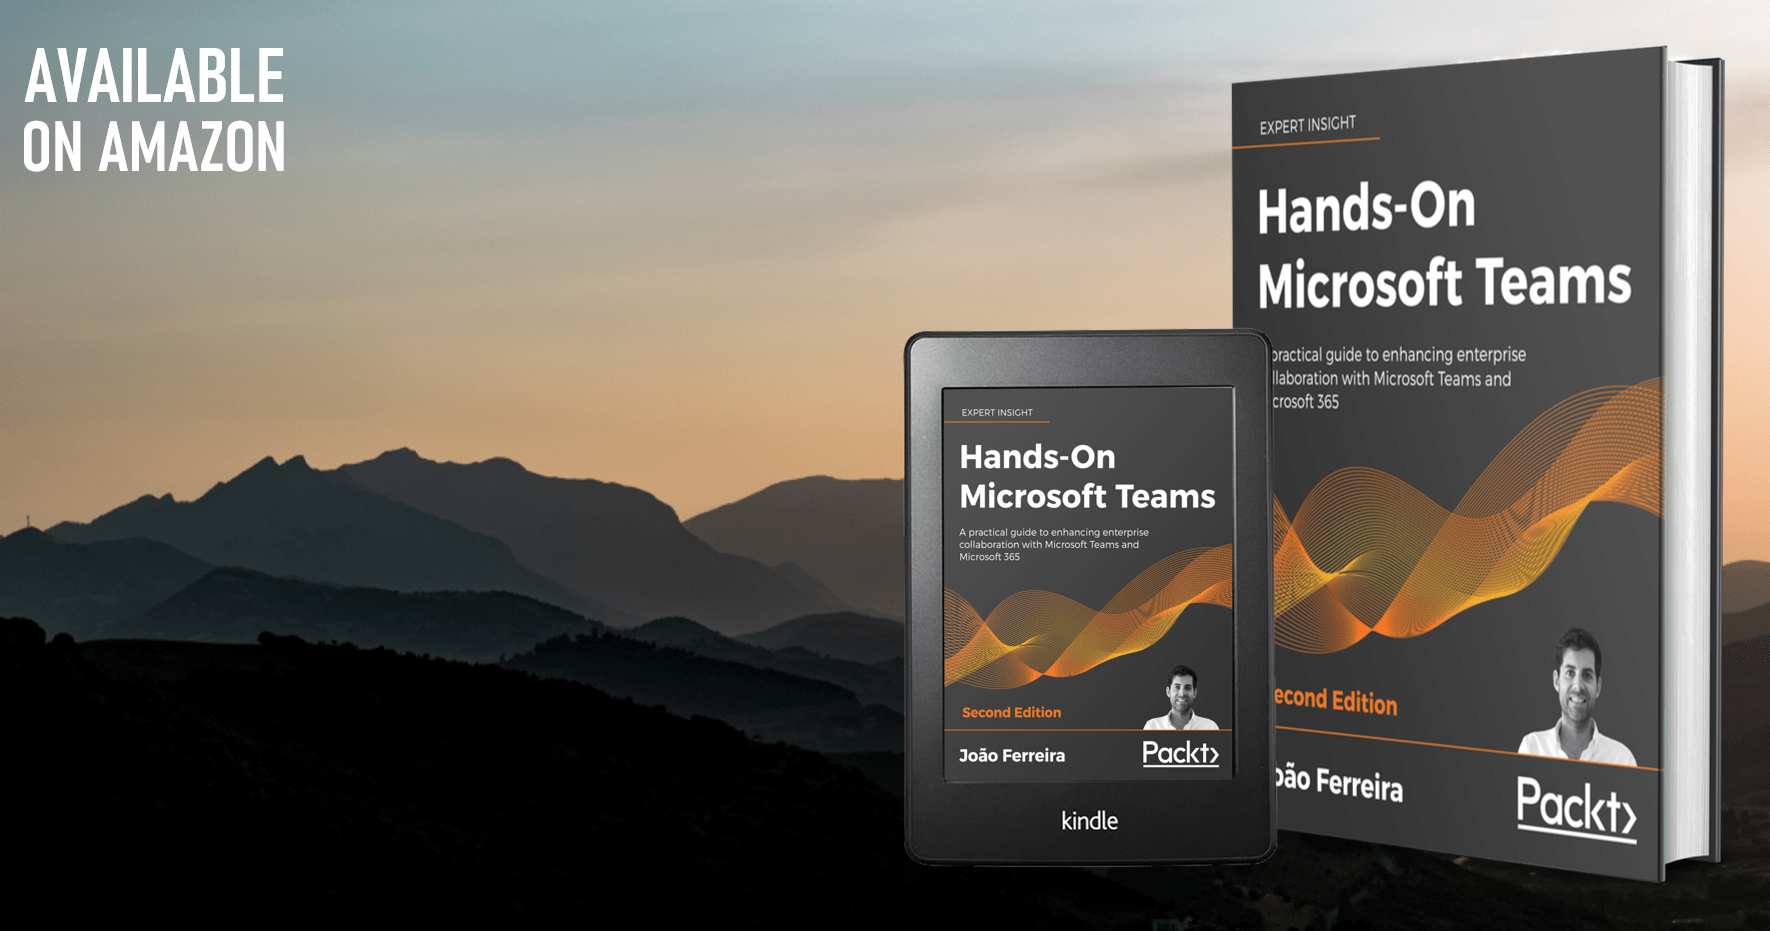 Hands-On Microsoft Teams second edition